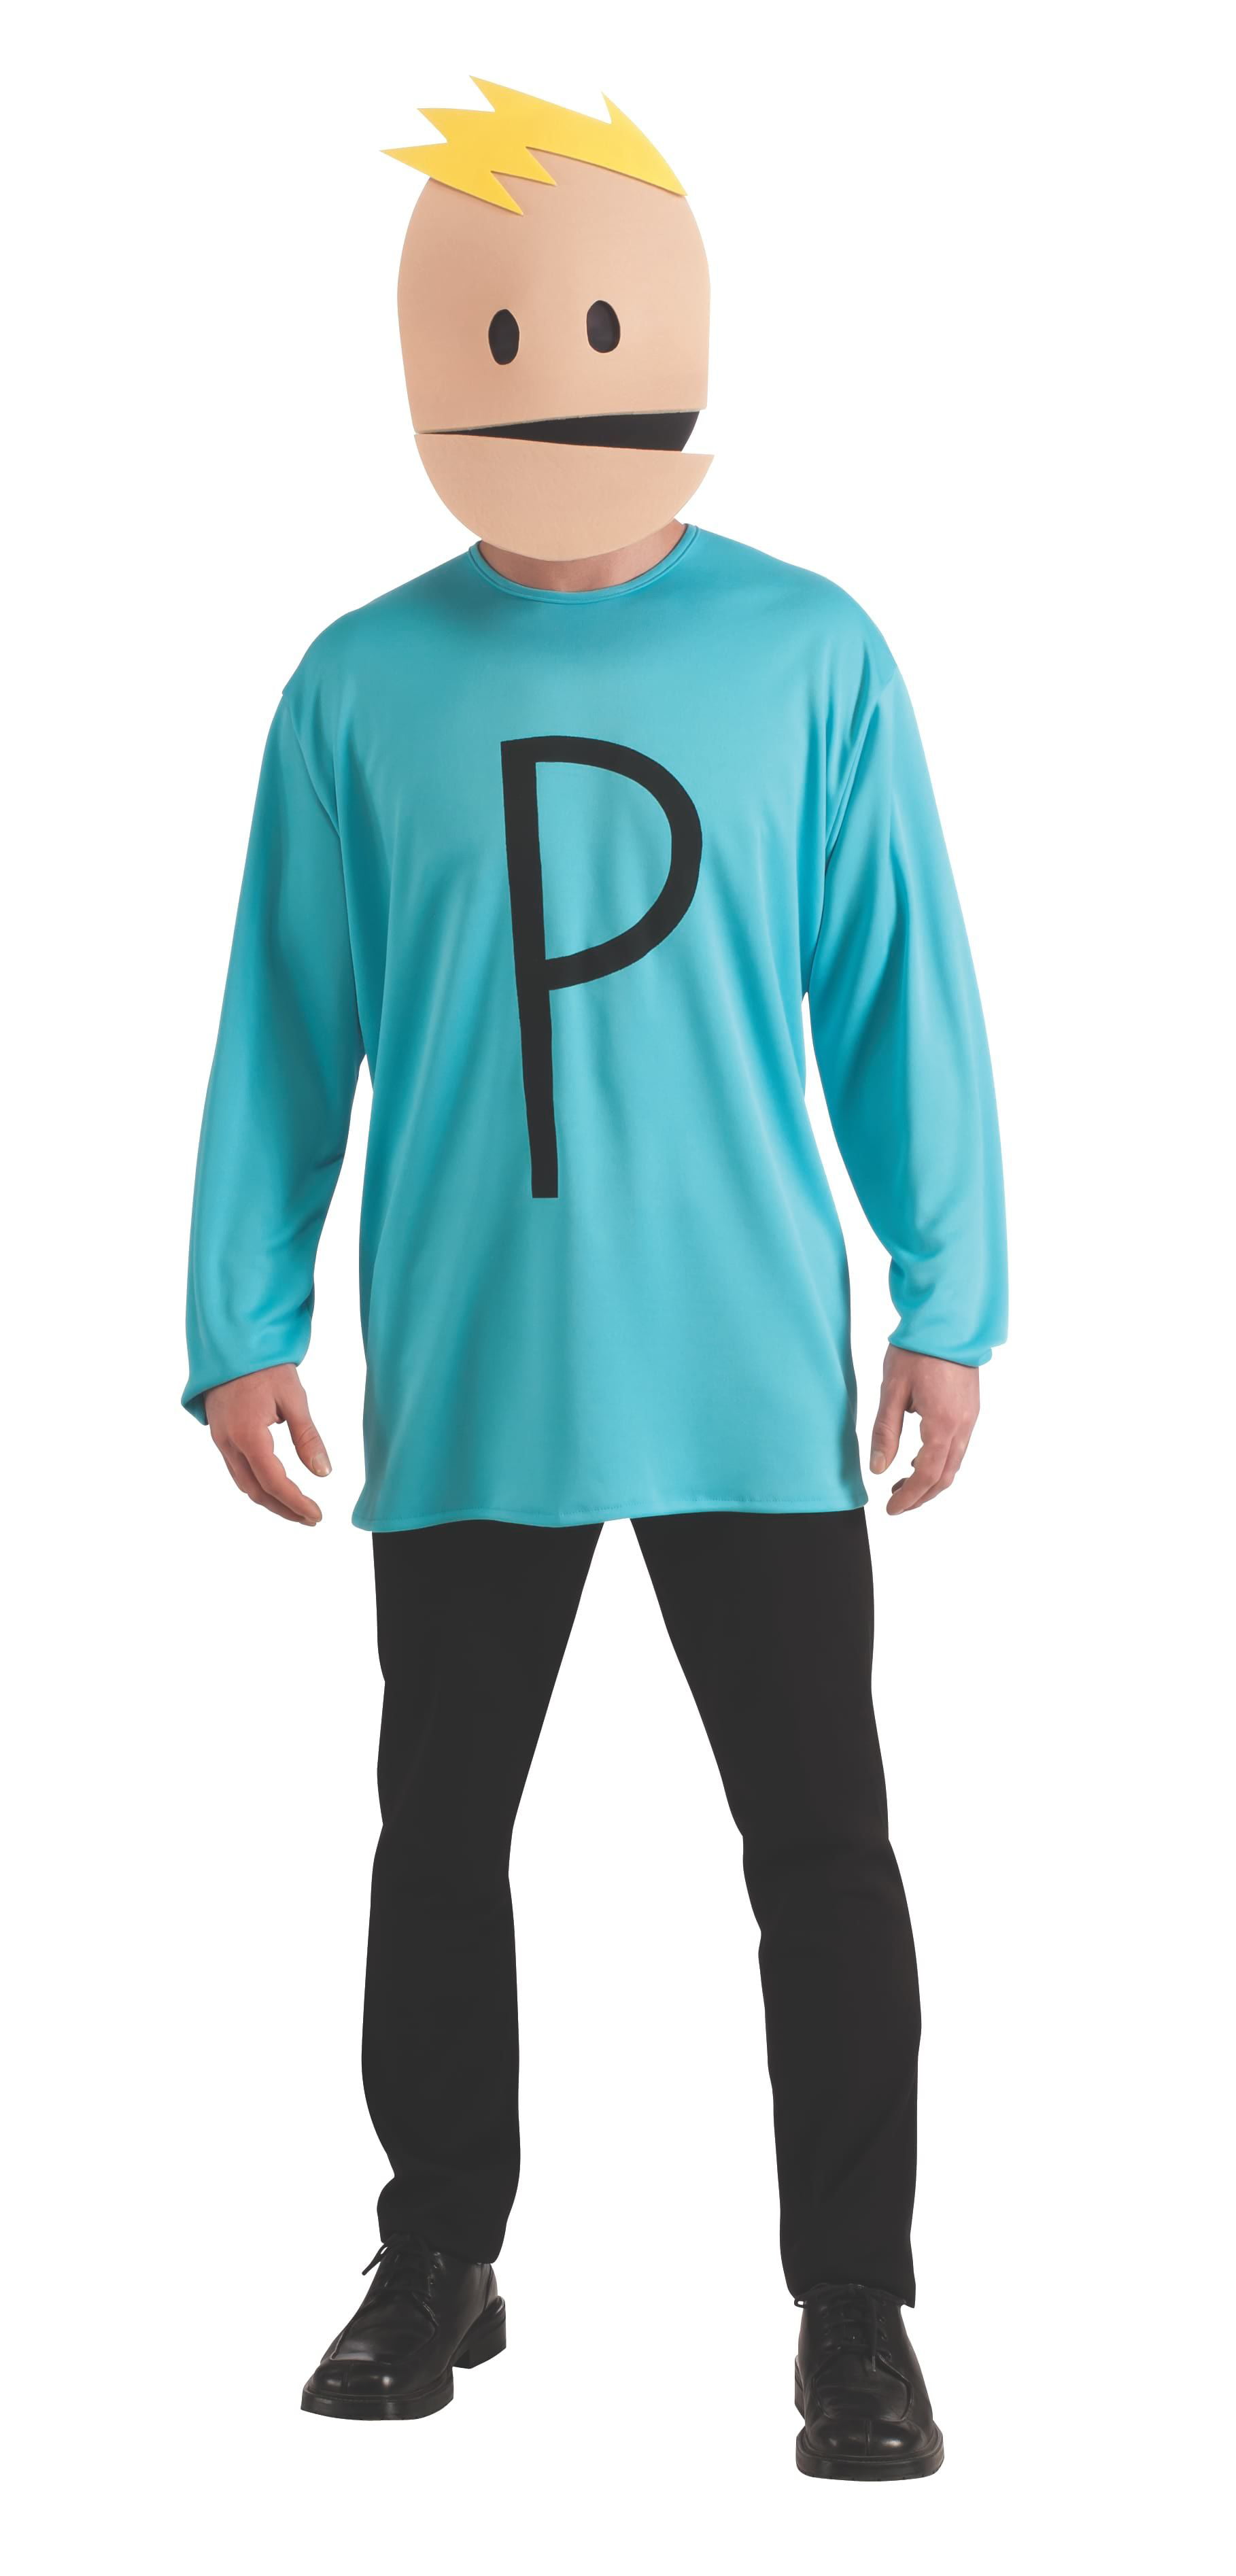 South Park Phillip Cartoon Adult Mens Funny Comedy Halloween Costume 